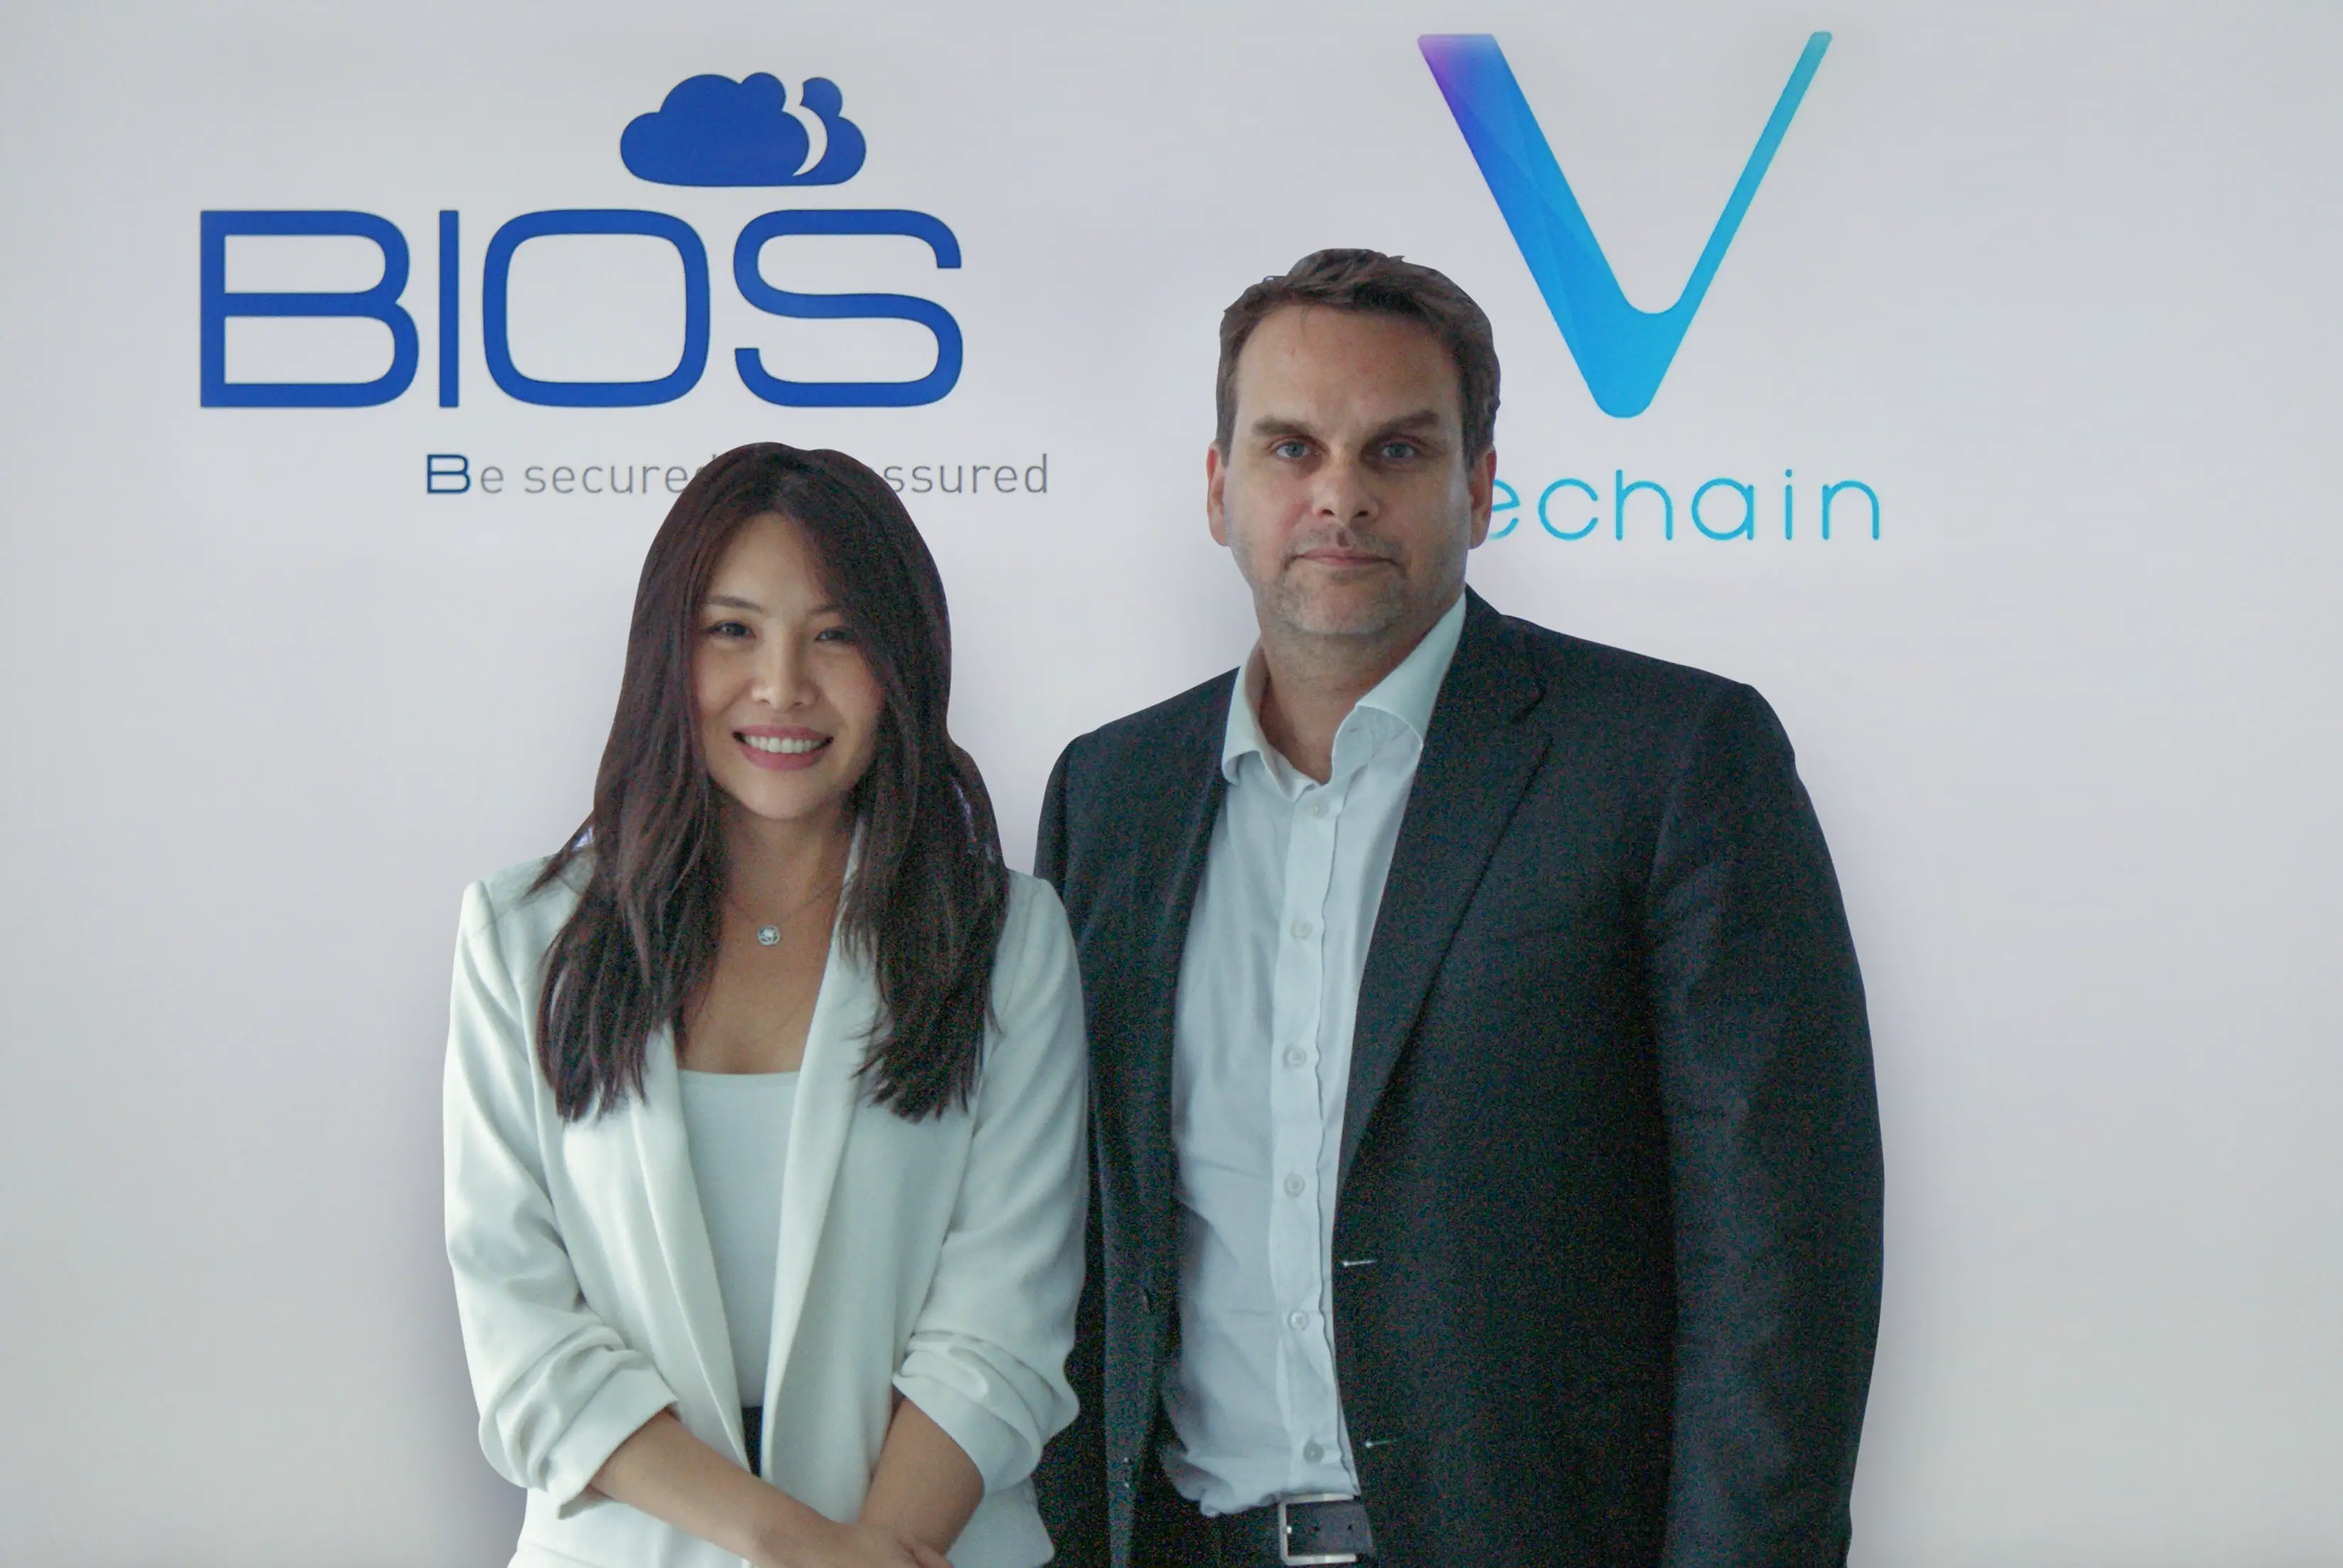 (L-R) Sara Nabaa, Country Manager, VeChain and Dominic Docherty, Managing Director, BIOS Middle East